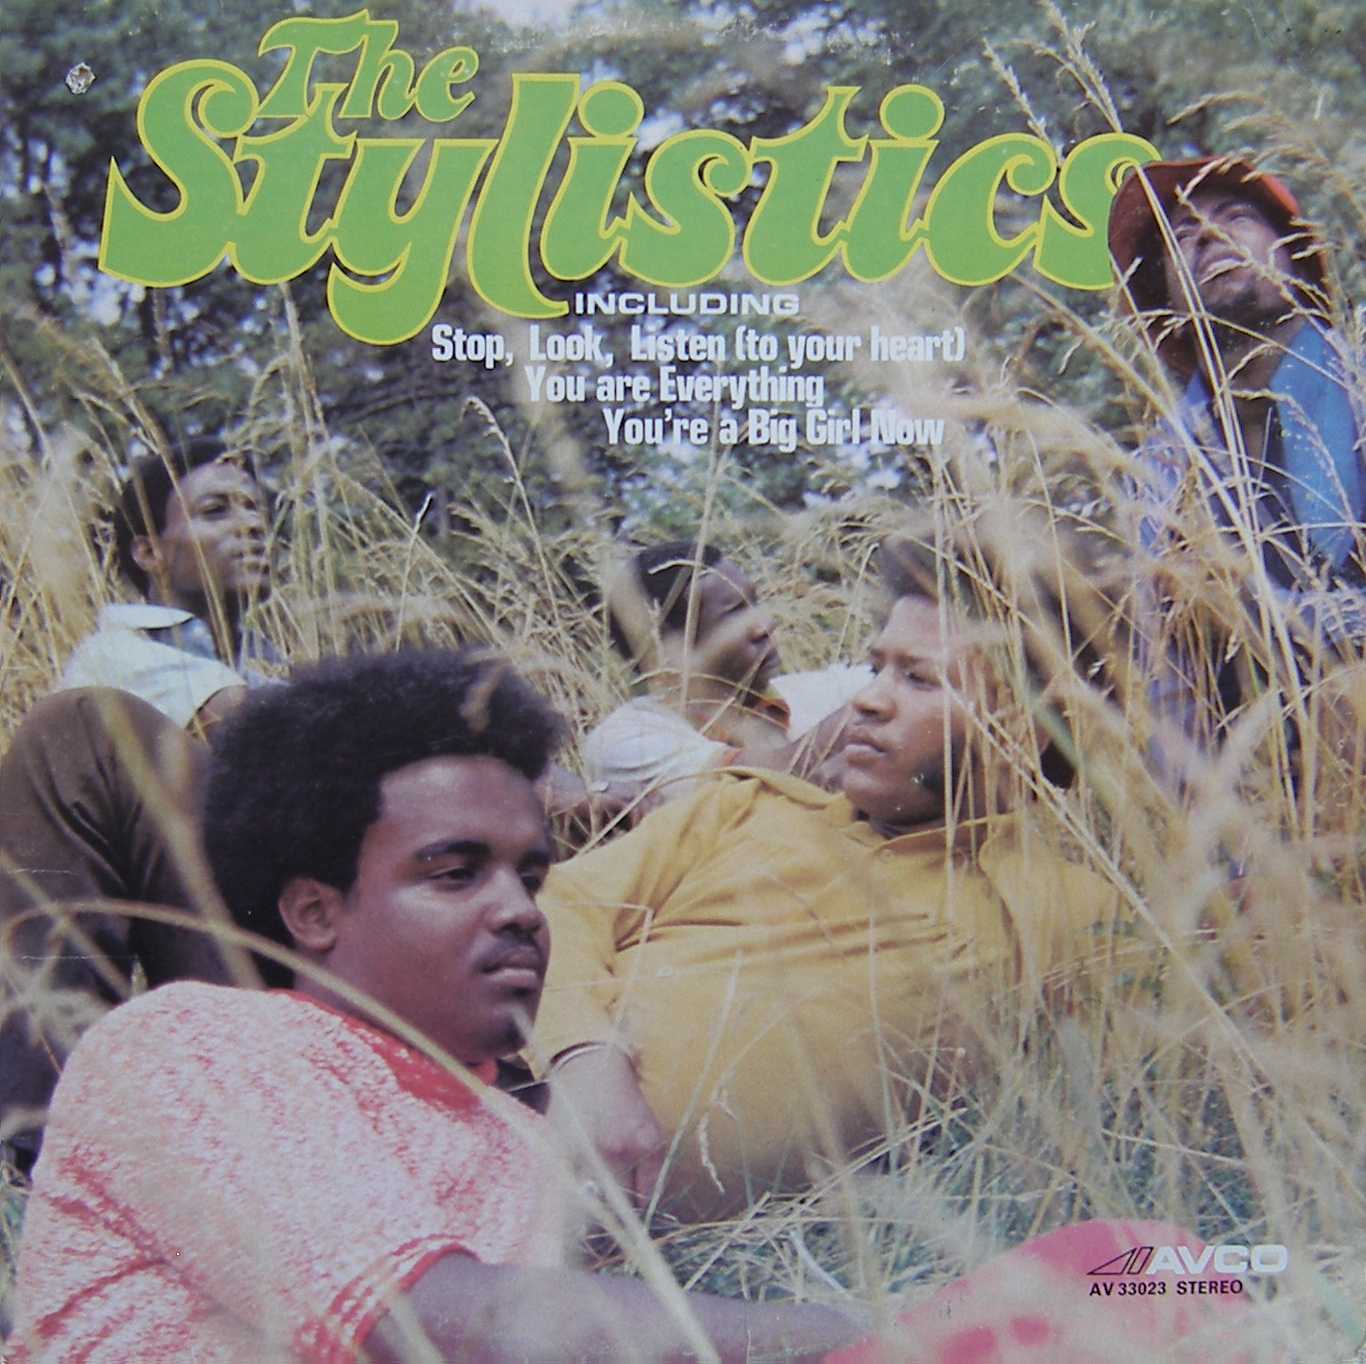 Art for People Make The World Go Round by The Stylistics